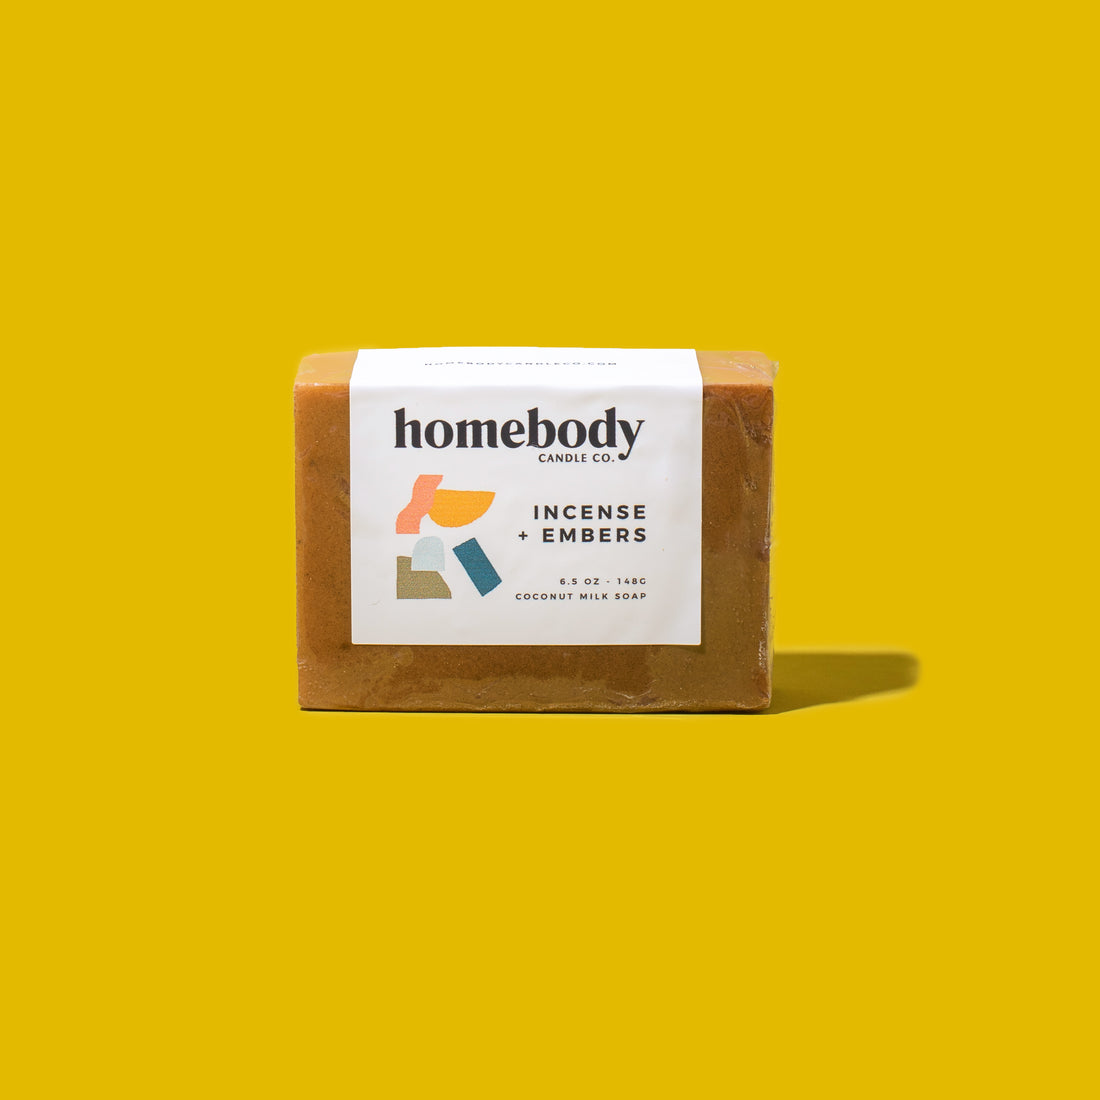 Incense + Embers ✸ fall collection milk soap Homebody Candle Co